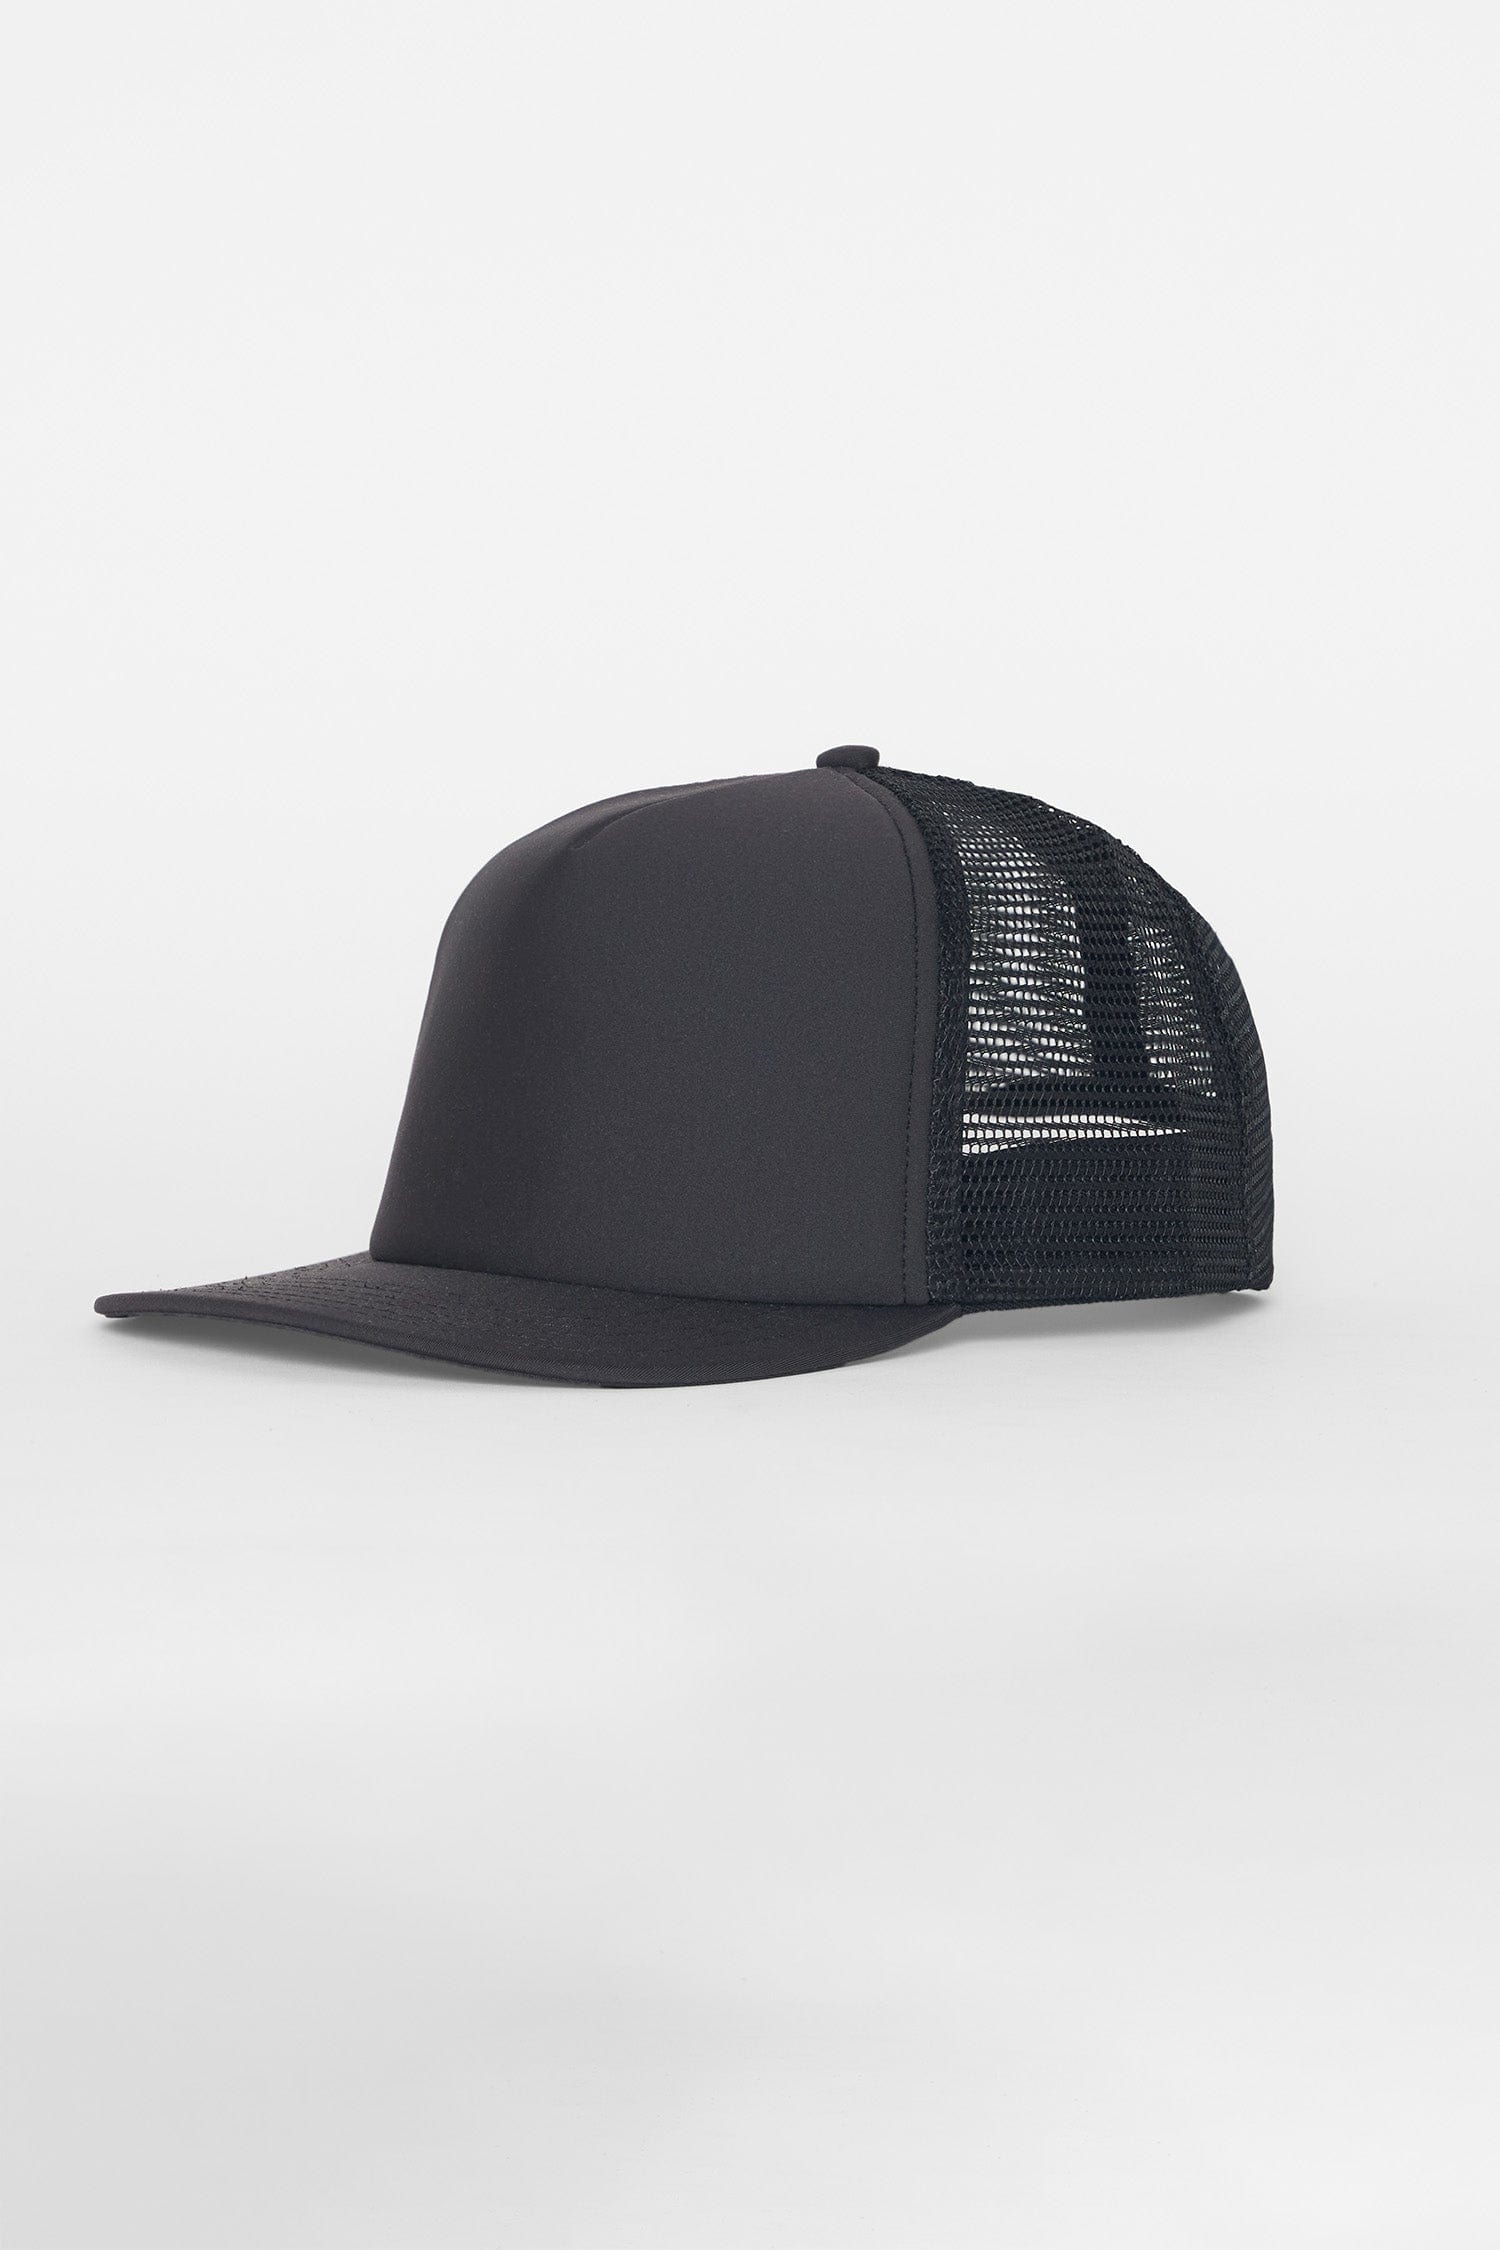 Collection Hats – Los Angeles Apparel - Japan